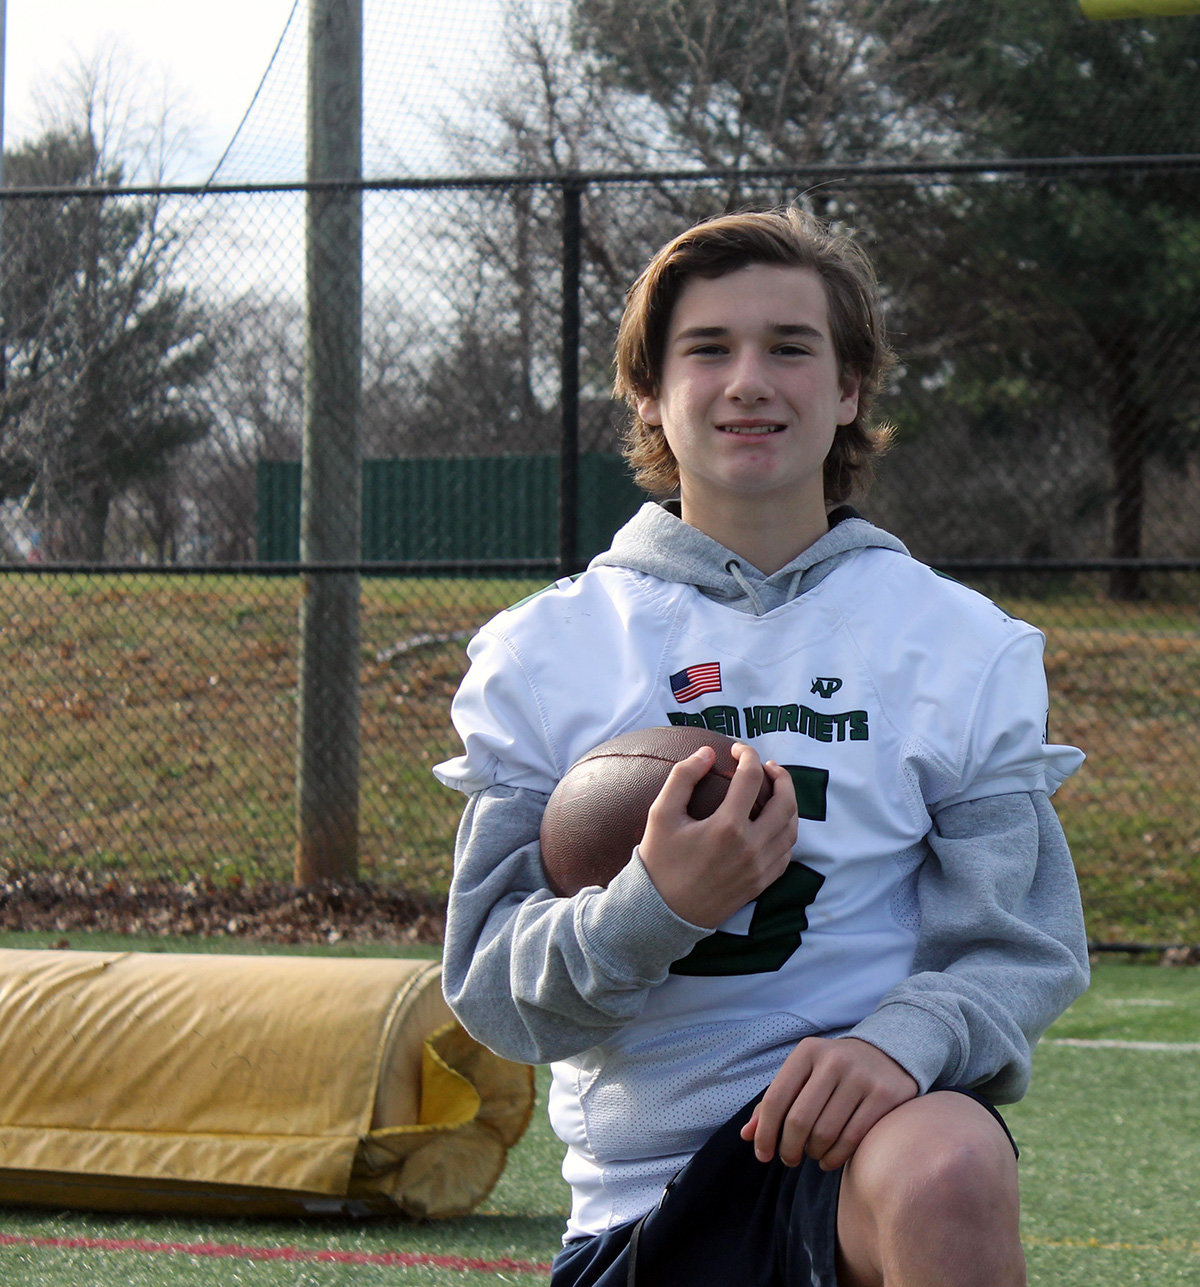 A running back and linebacker for the 14U Green Hornets, Mason Keegan earned this year’s Buzz Platt Player Award for his excellence in play, character and sportsmanship.